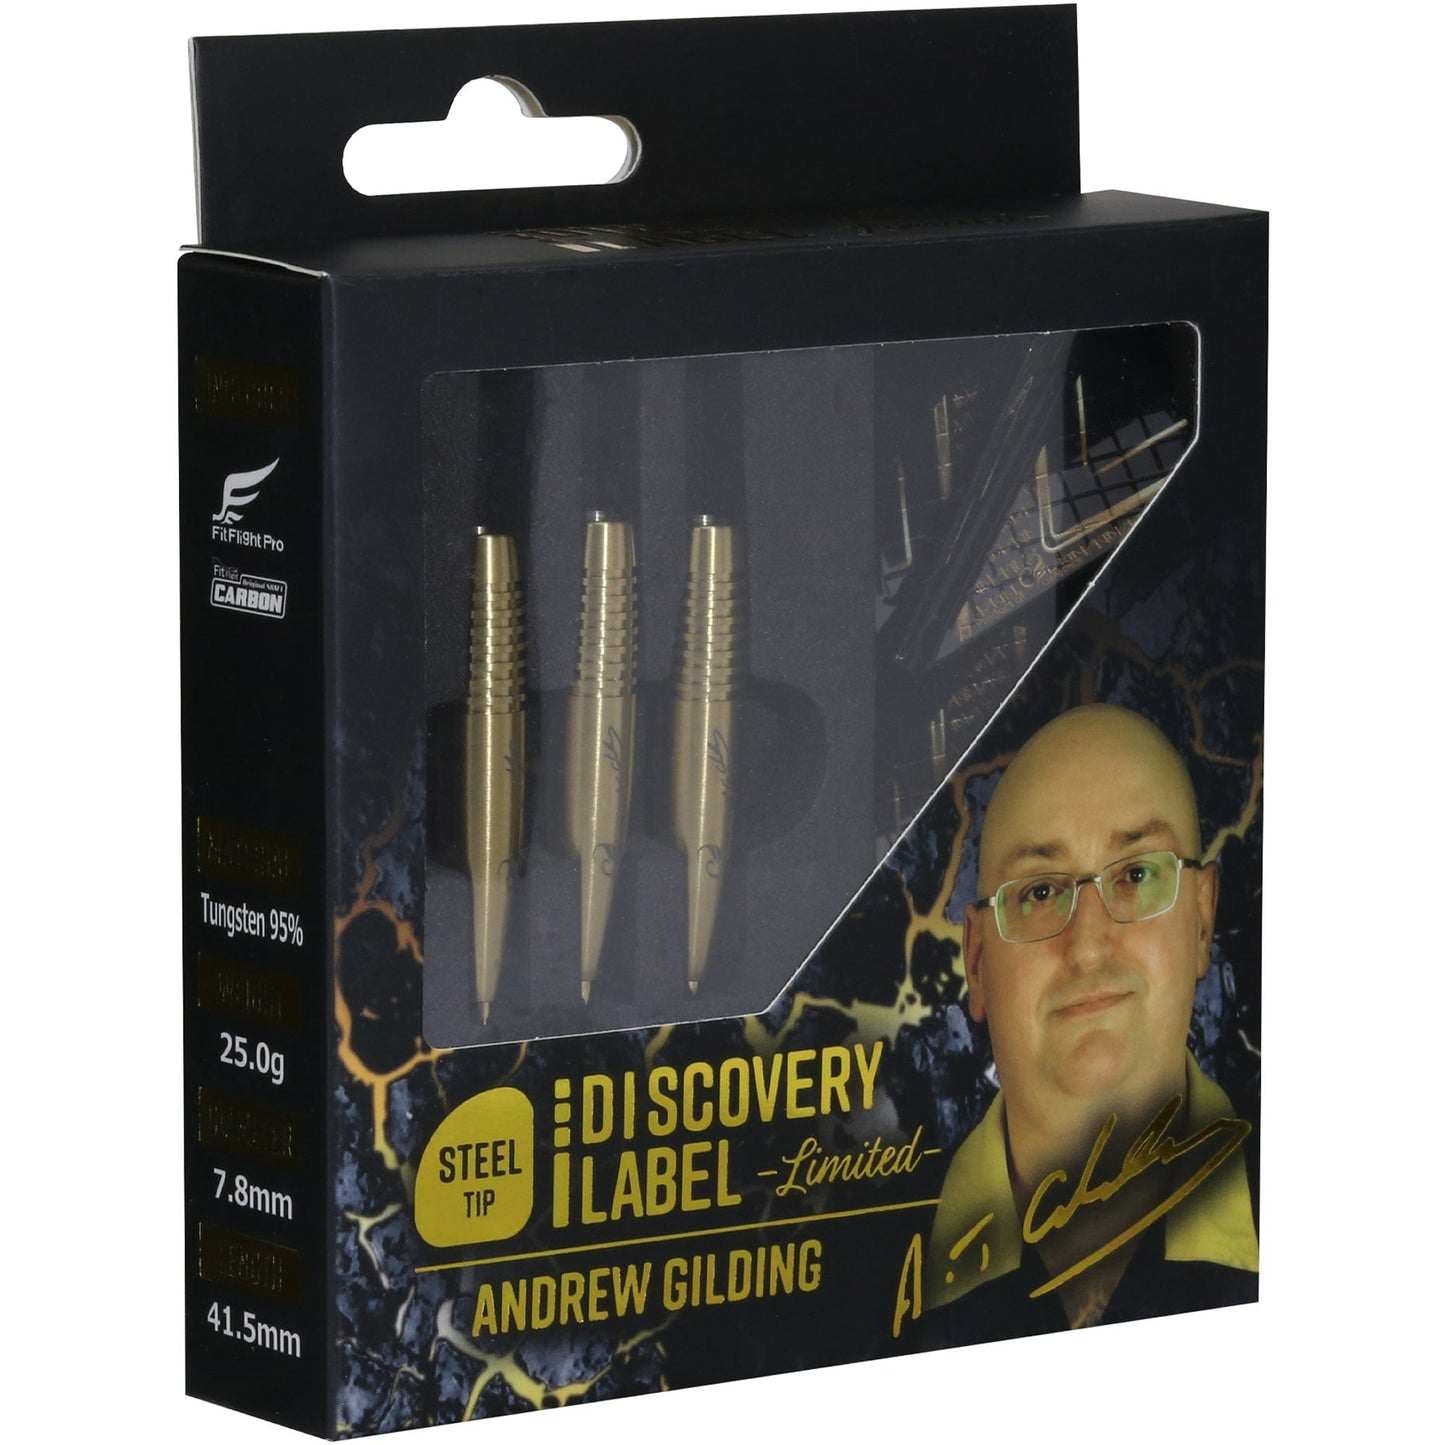 Cosmo Darts - Andrew Gilding - 95% Steel Tip - Limited Edition - Gold 25g